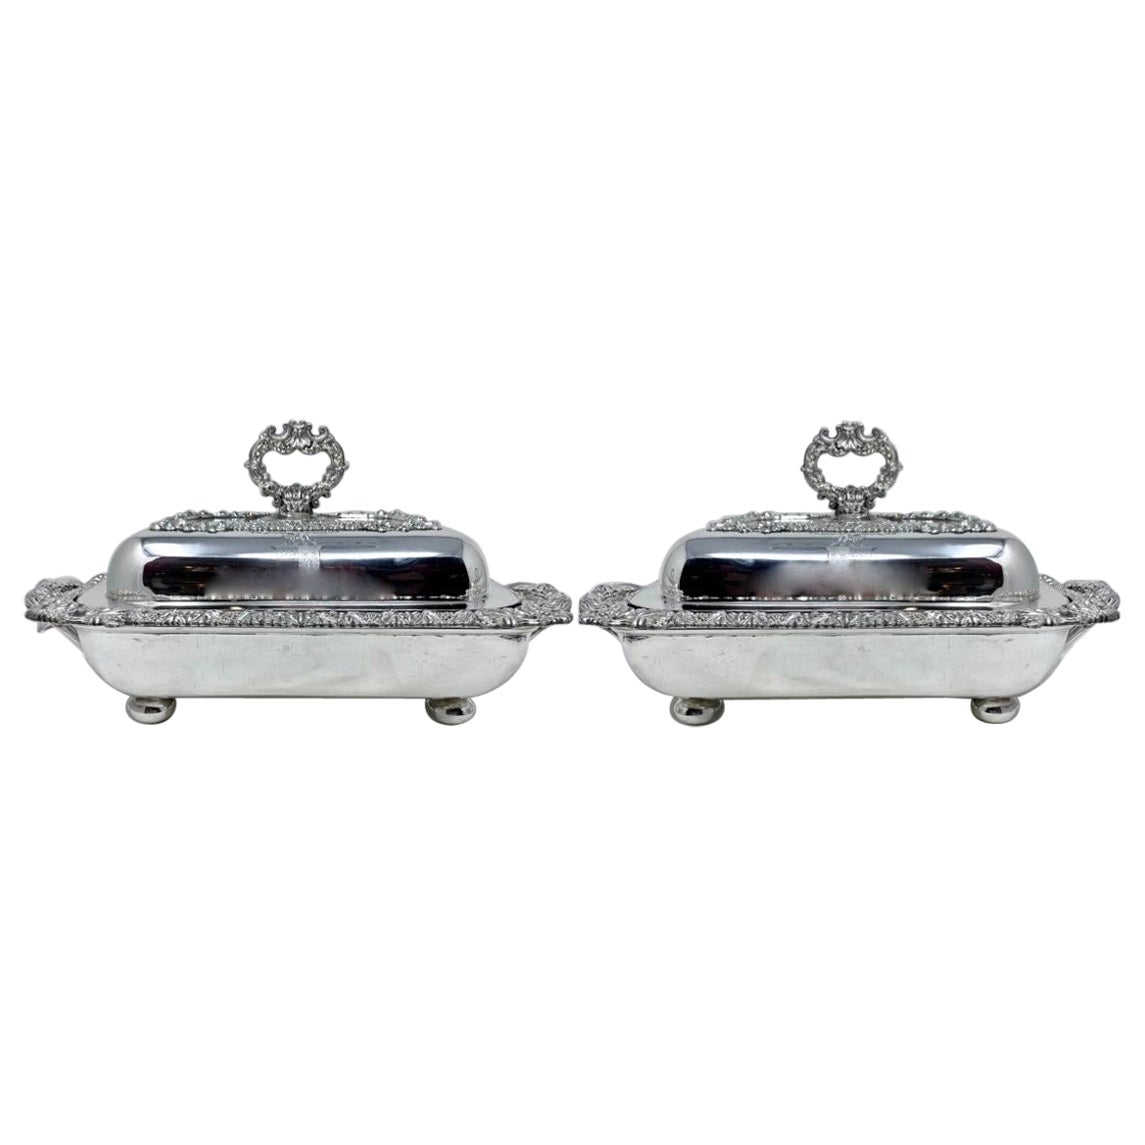 Pair Antique English Georgian Sheffield Silver Entree Dishes, Circa 1830 For Sale